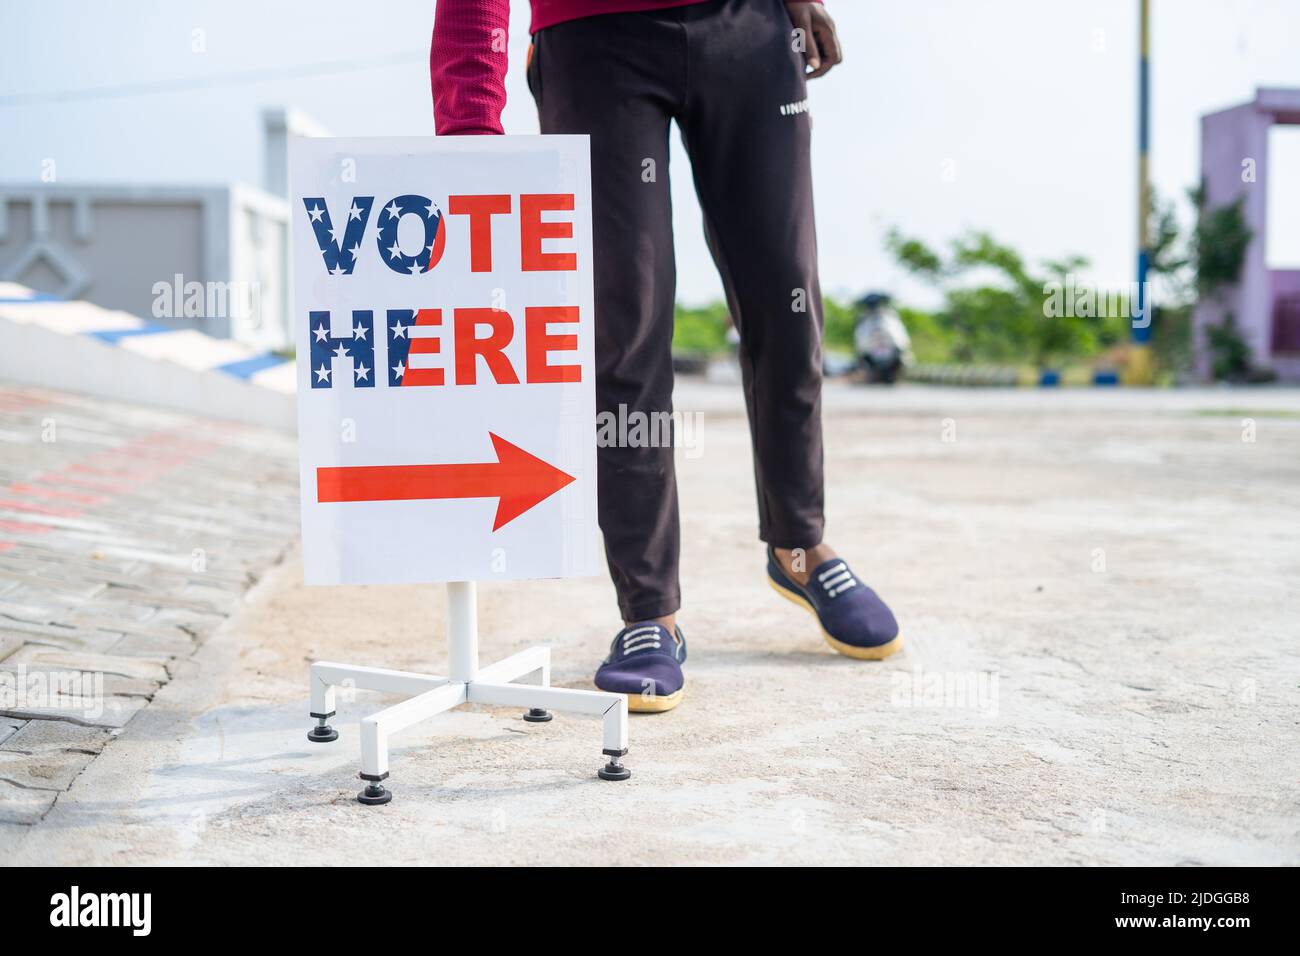 Man placing vote here sign board direction near polling booth - concept of responsibility, voting or election day and democracy Stock Photo